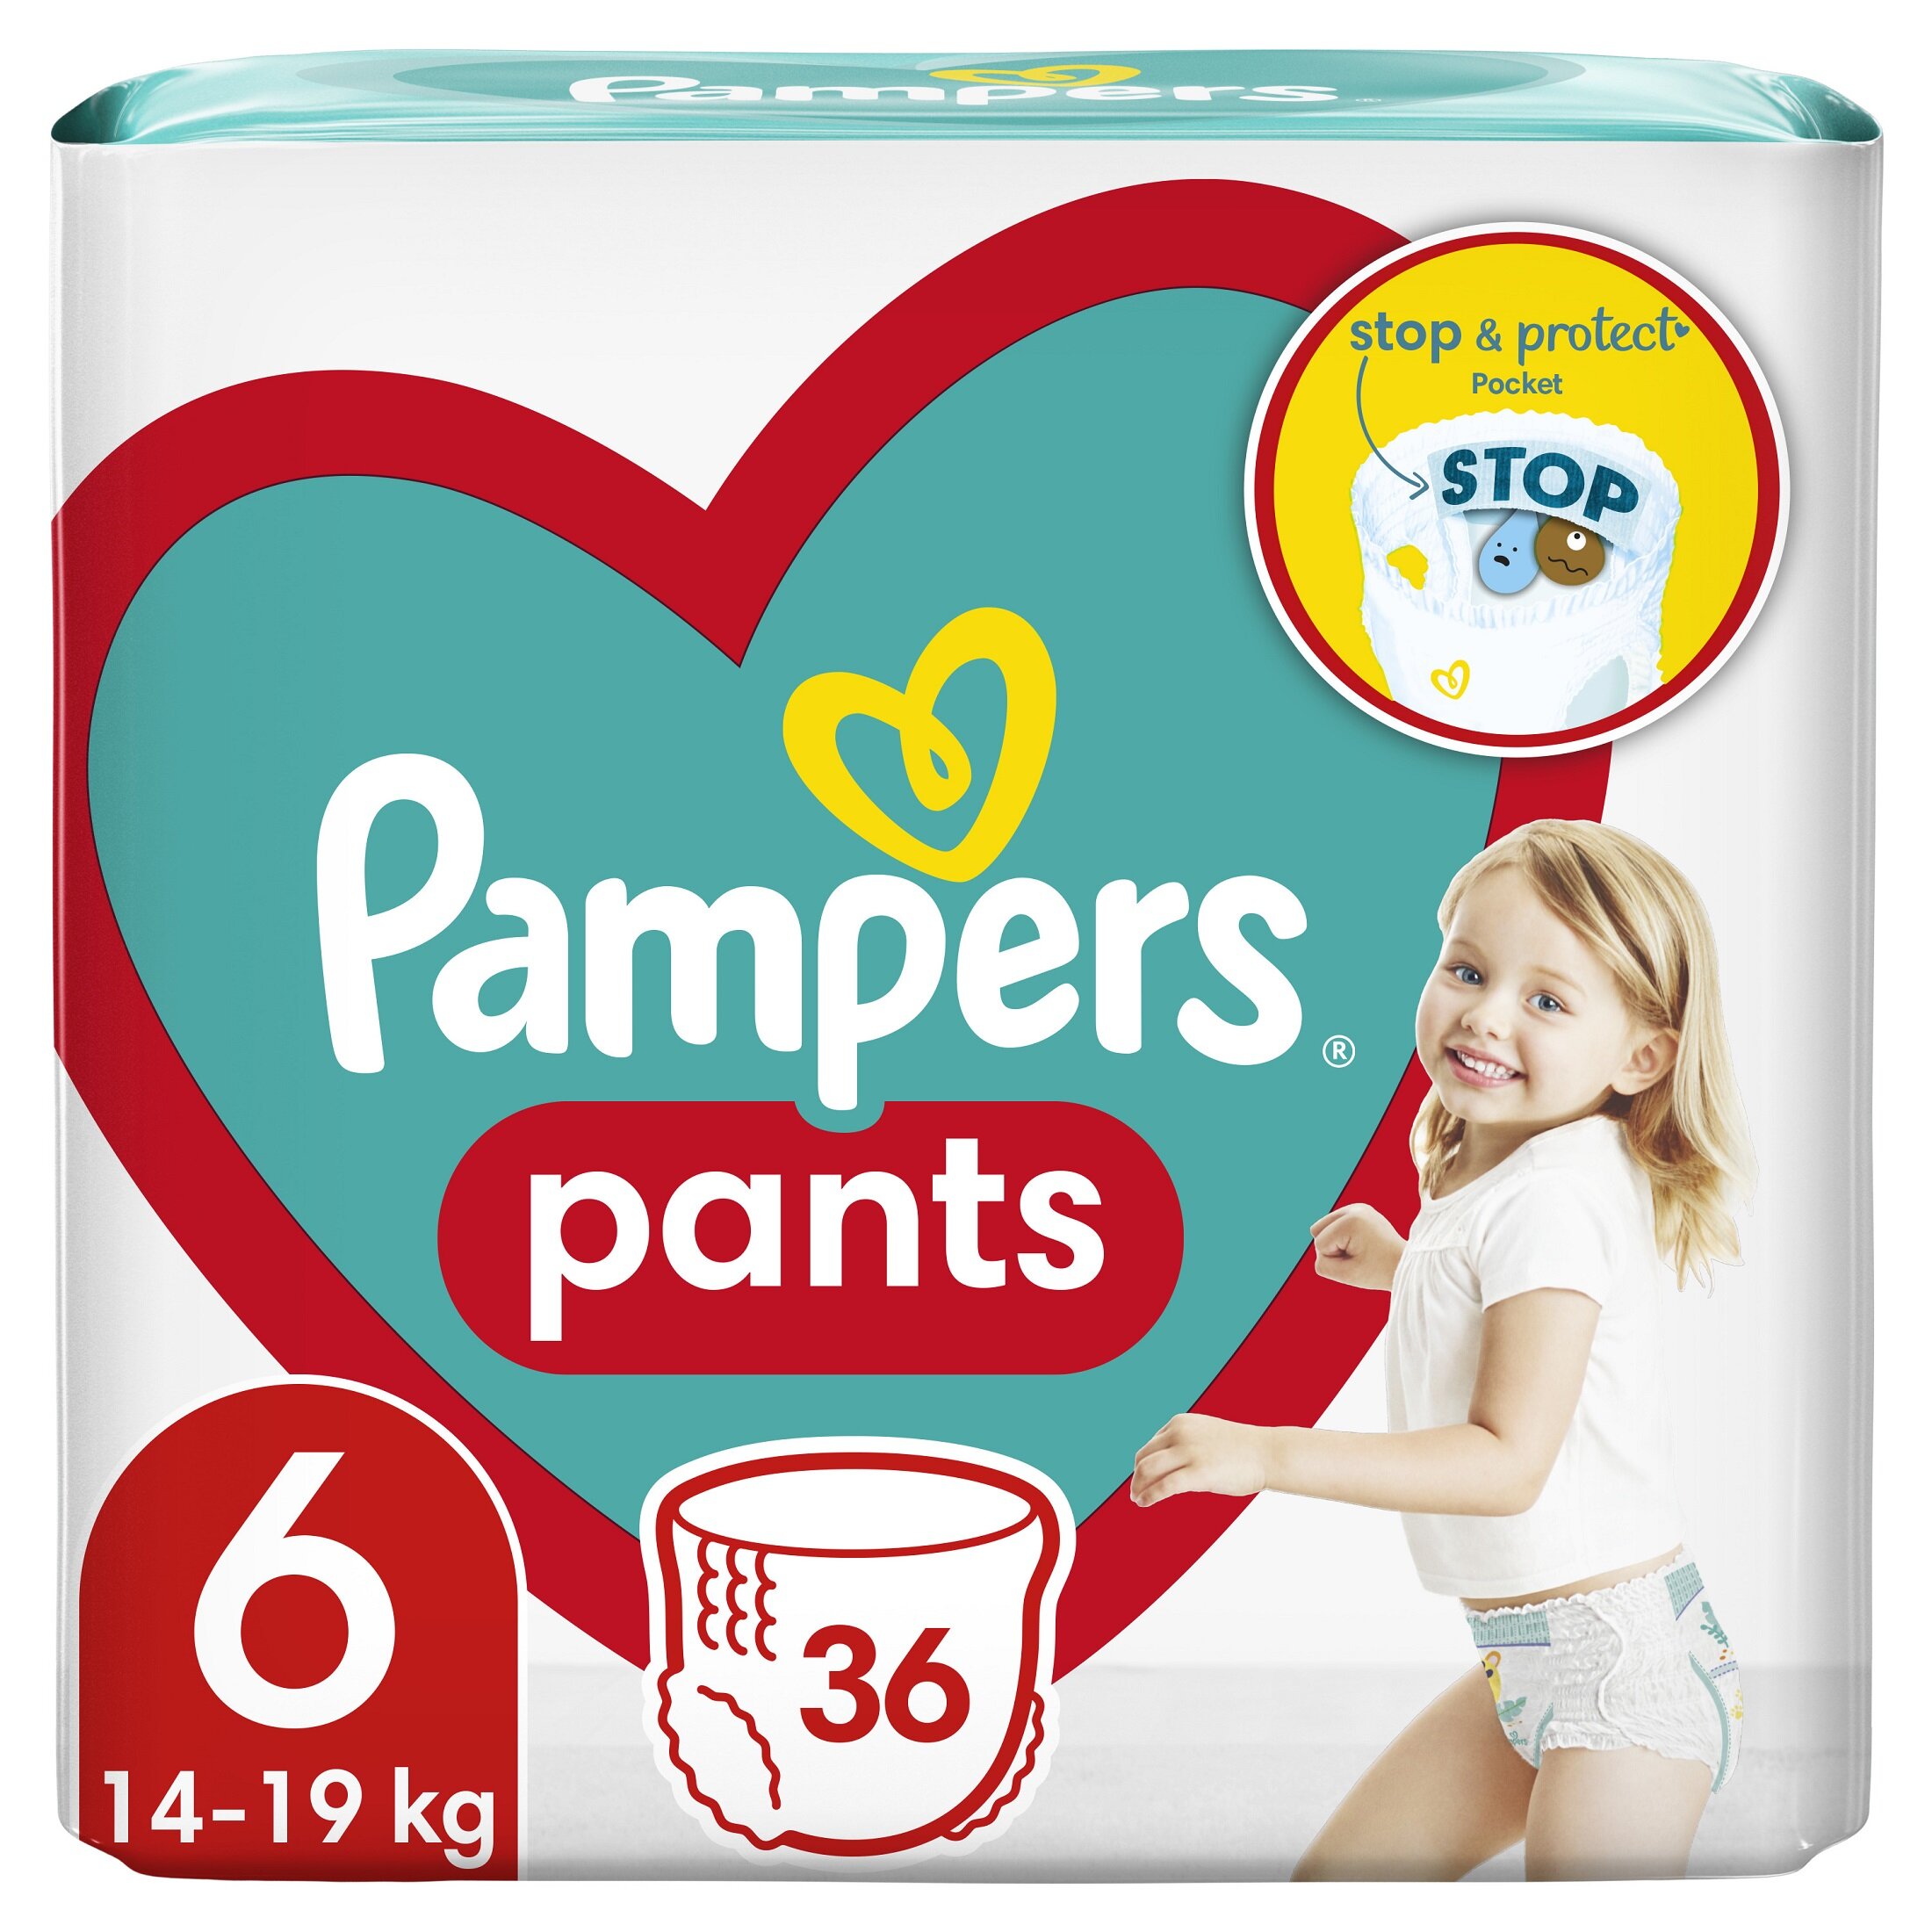 hurtownia pieluch pampers 1